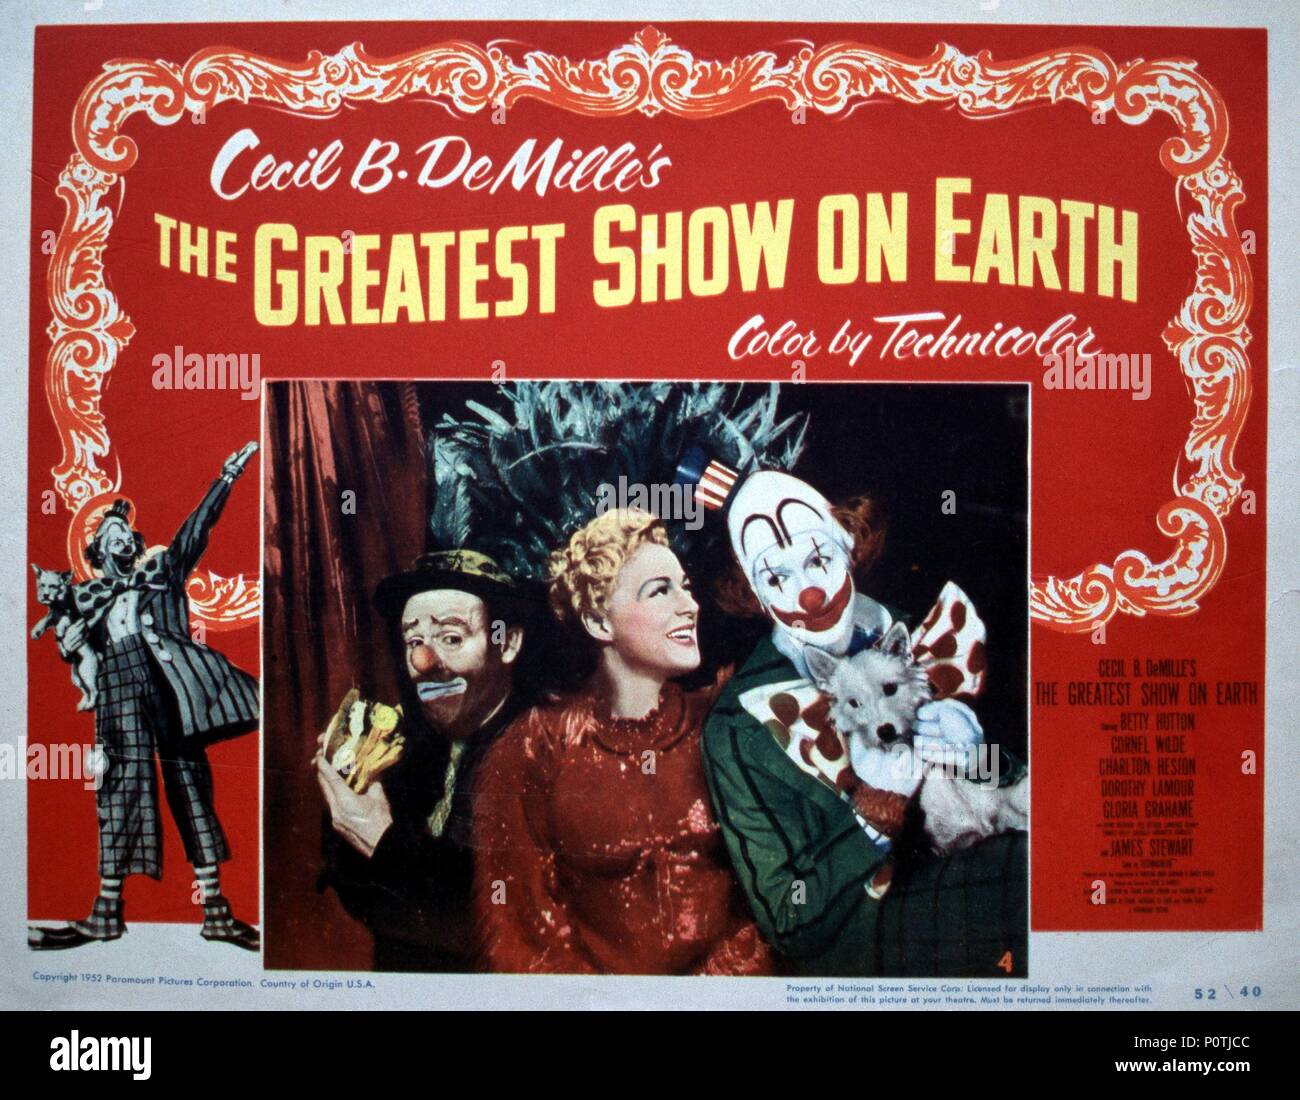 original-film-title-the-greatest-show-on-earth-english-title-the-greatest-show-on-earth-film-director-cecil-b-demille-year-1952-credit-paramount-pictures-album-P0TJCC.jpg